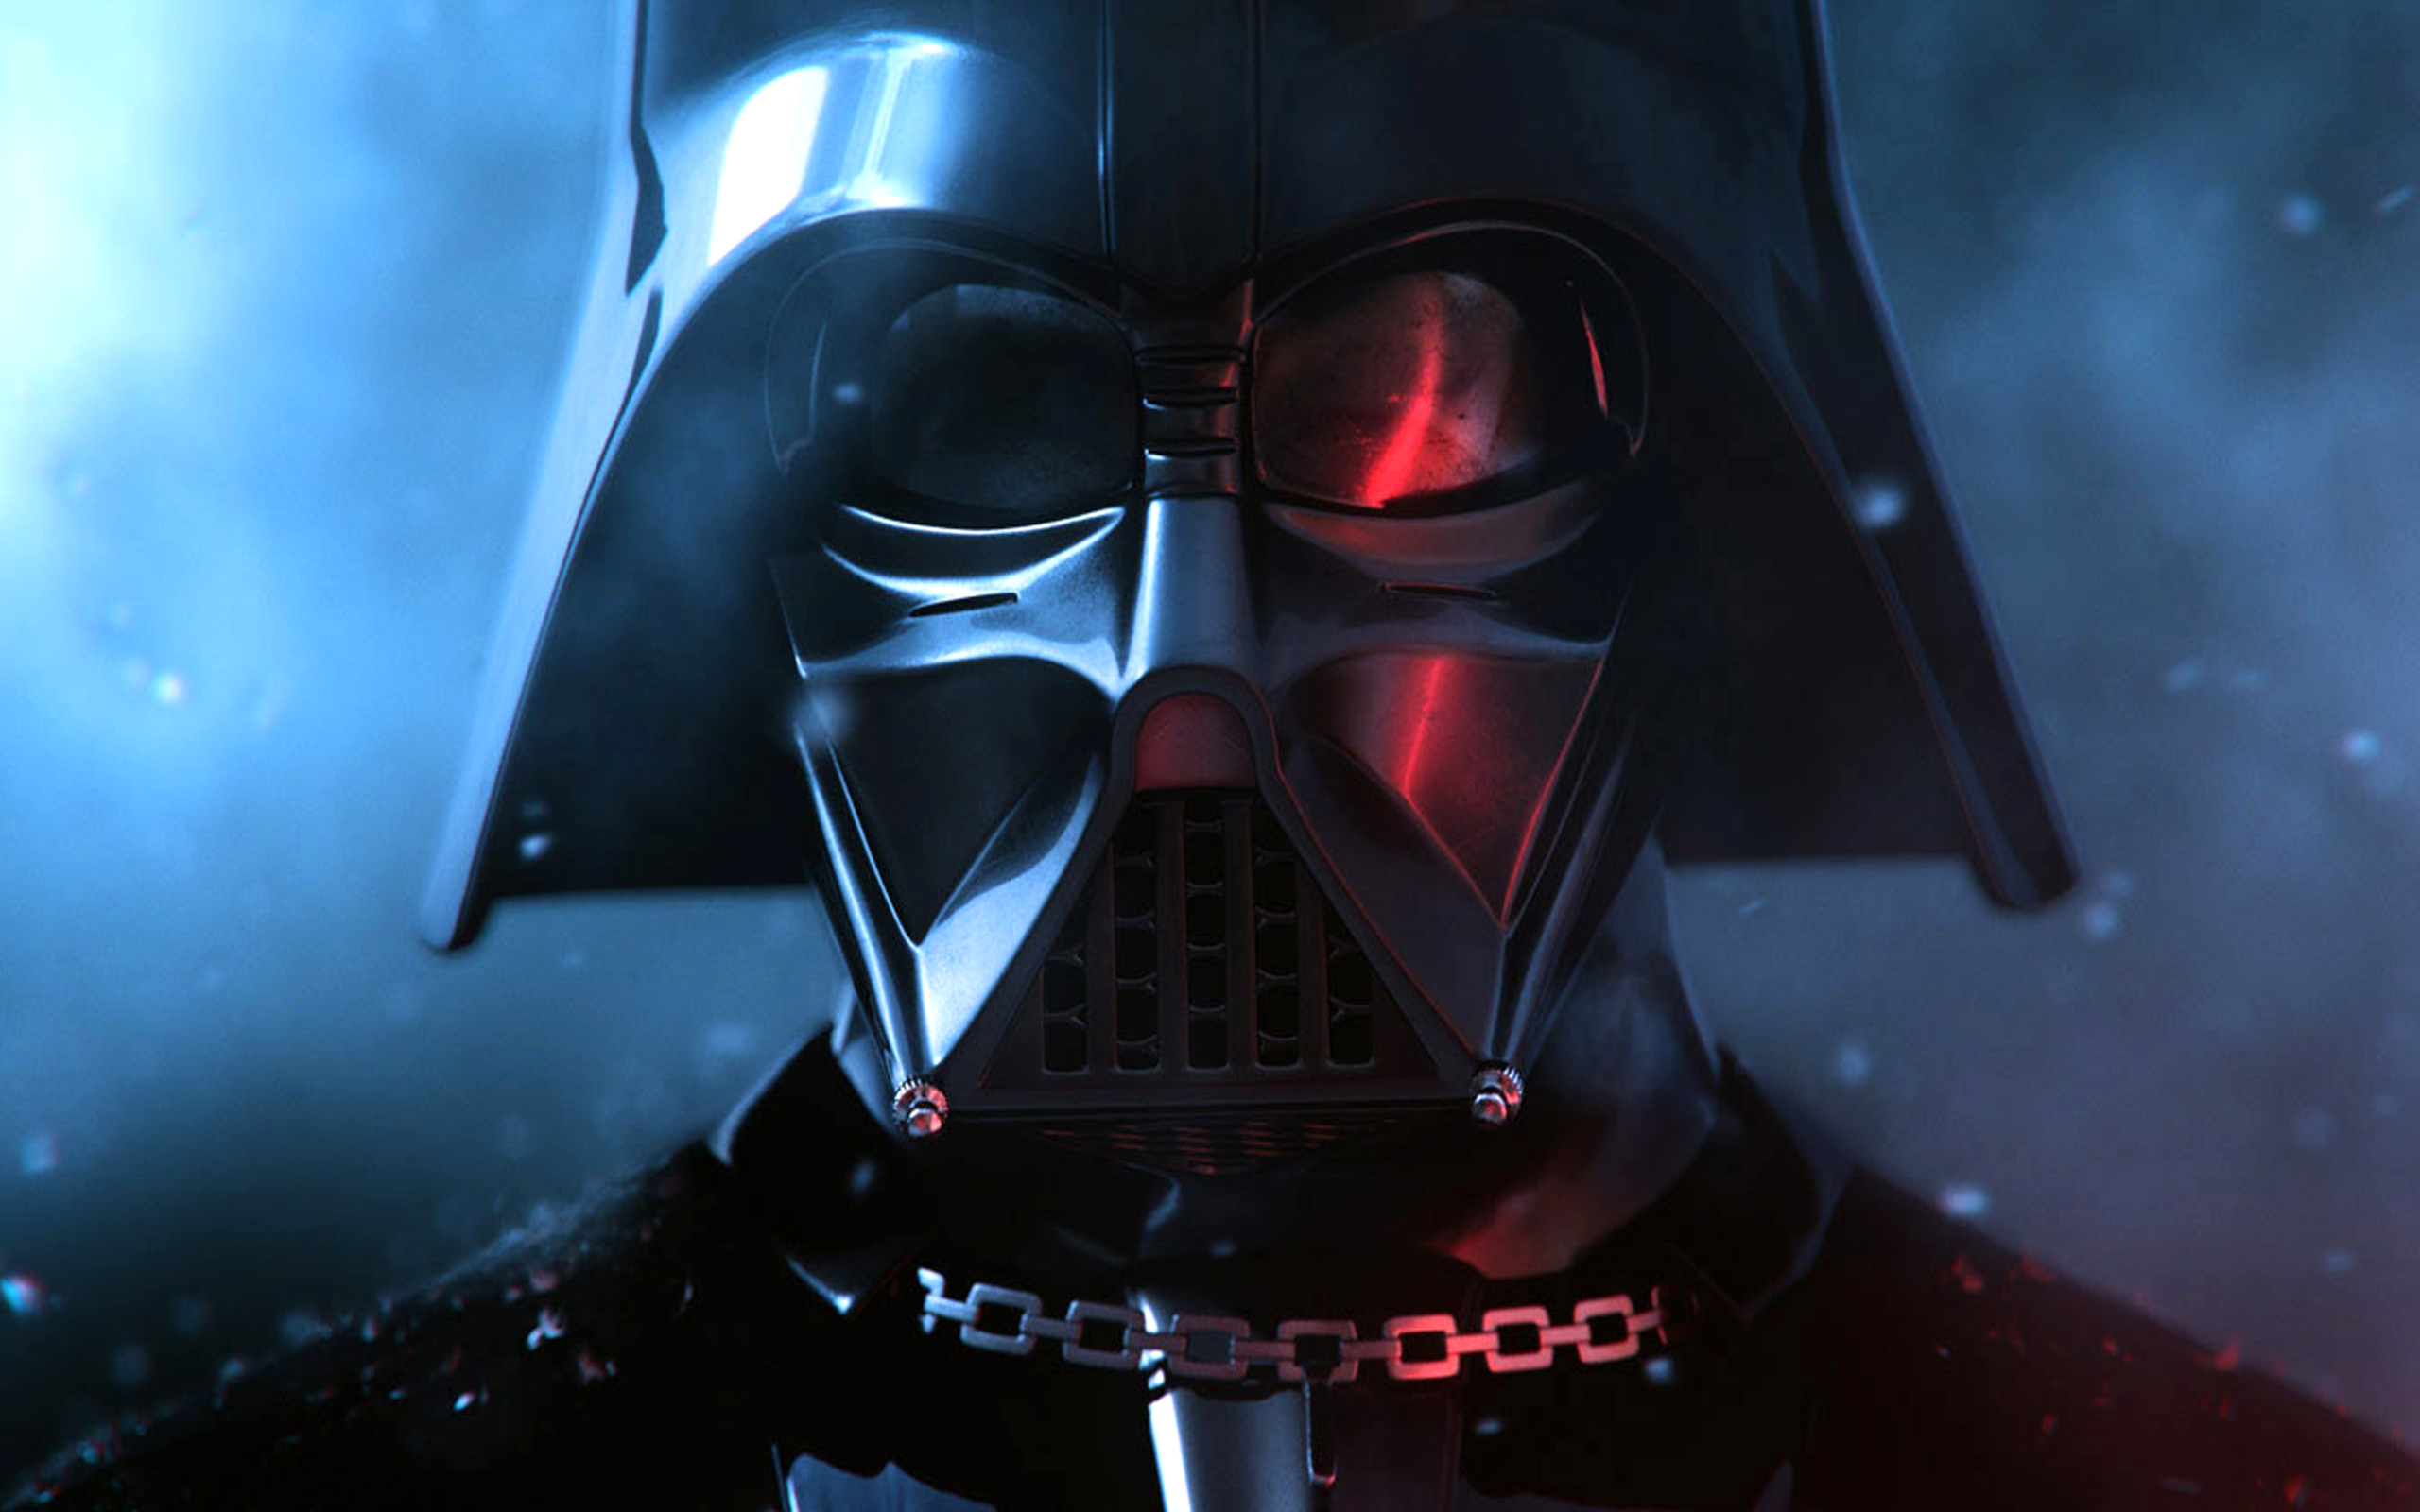 Amazing Vader Pictures & Backgrounds